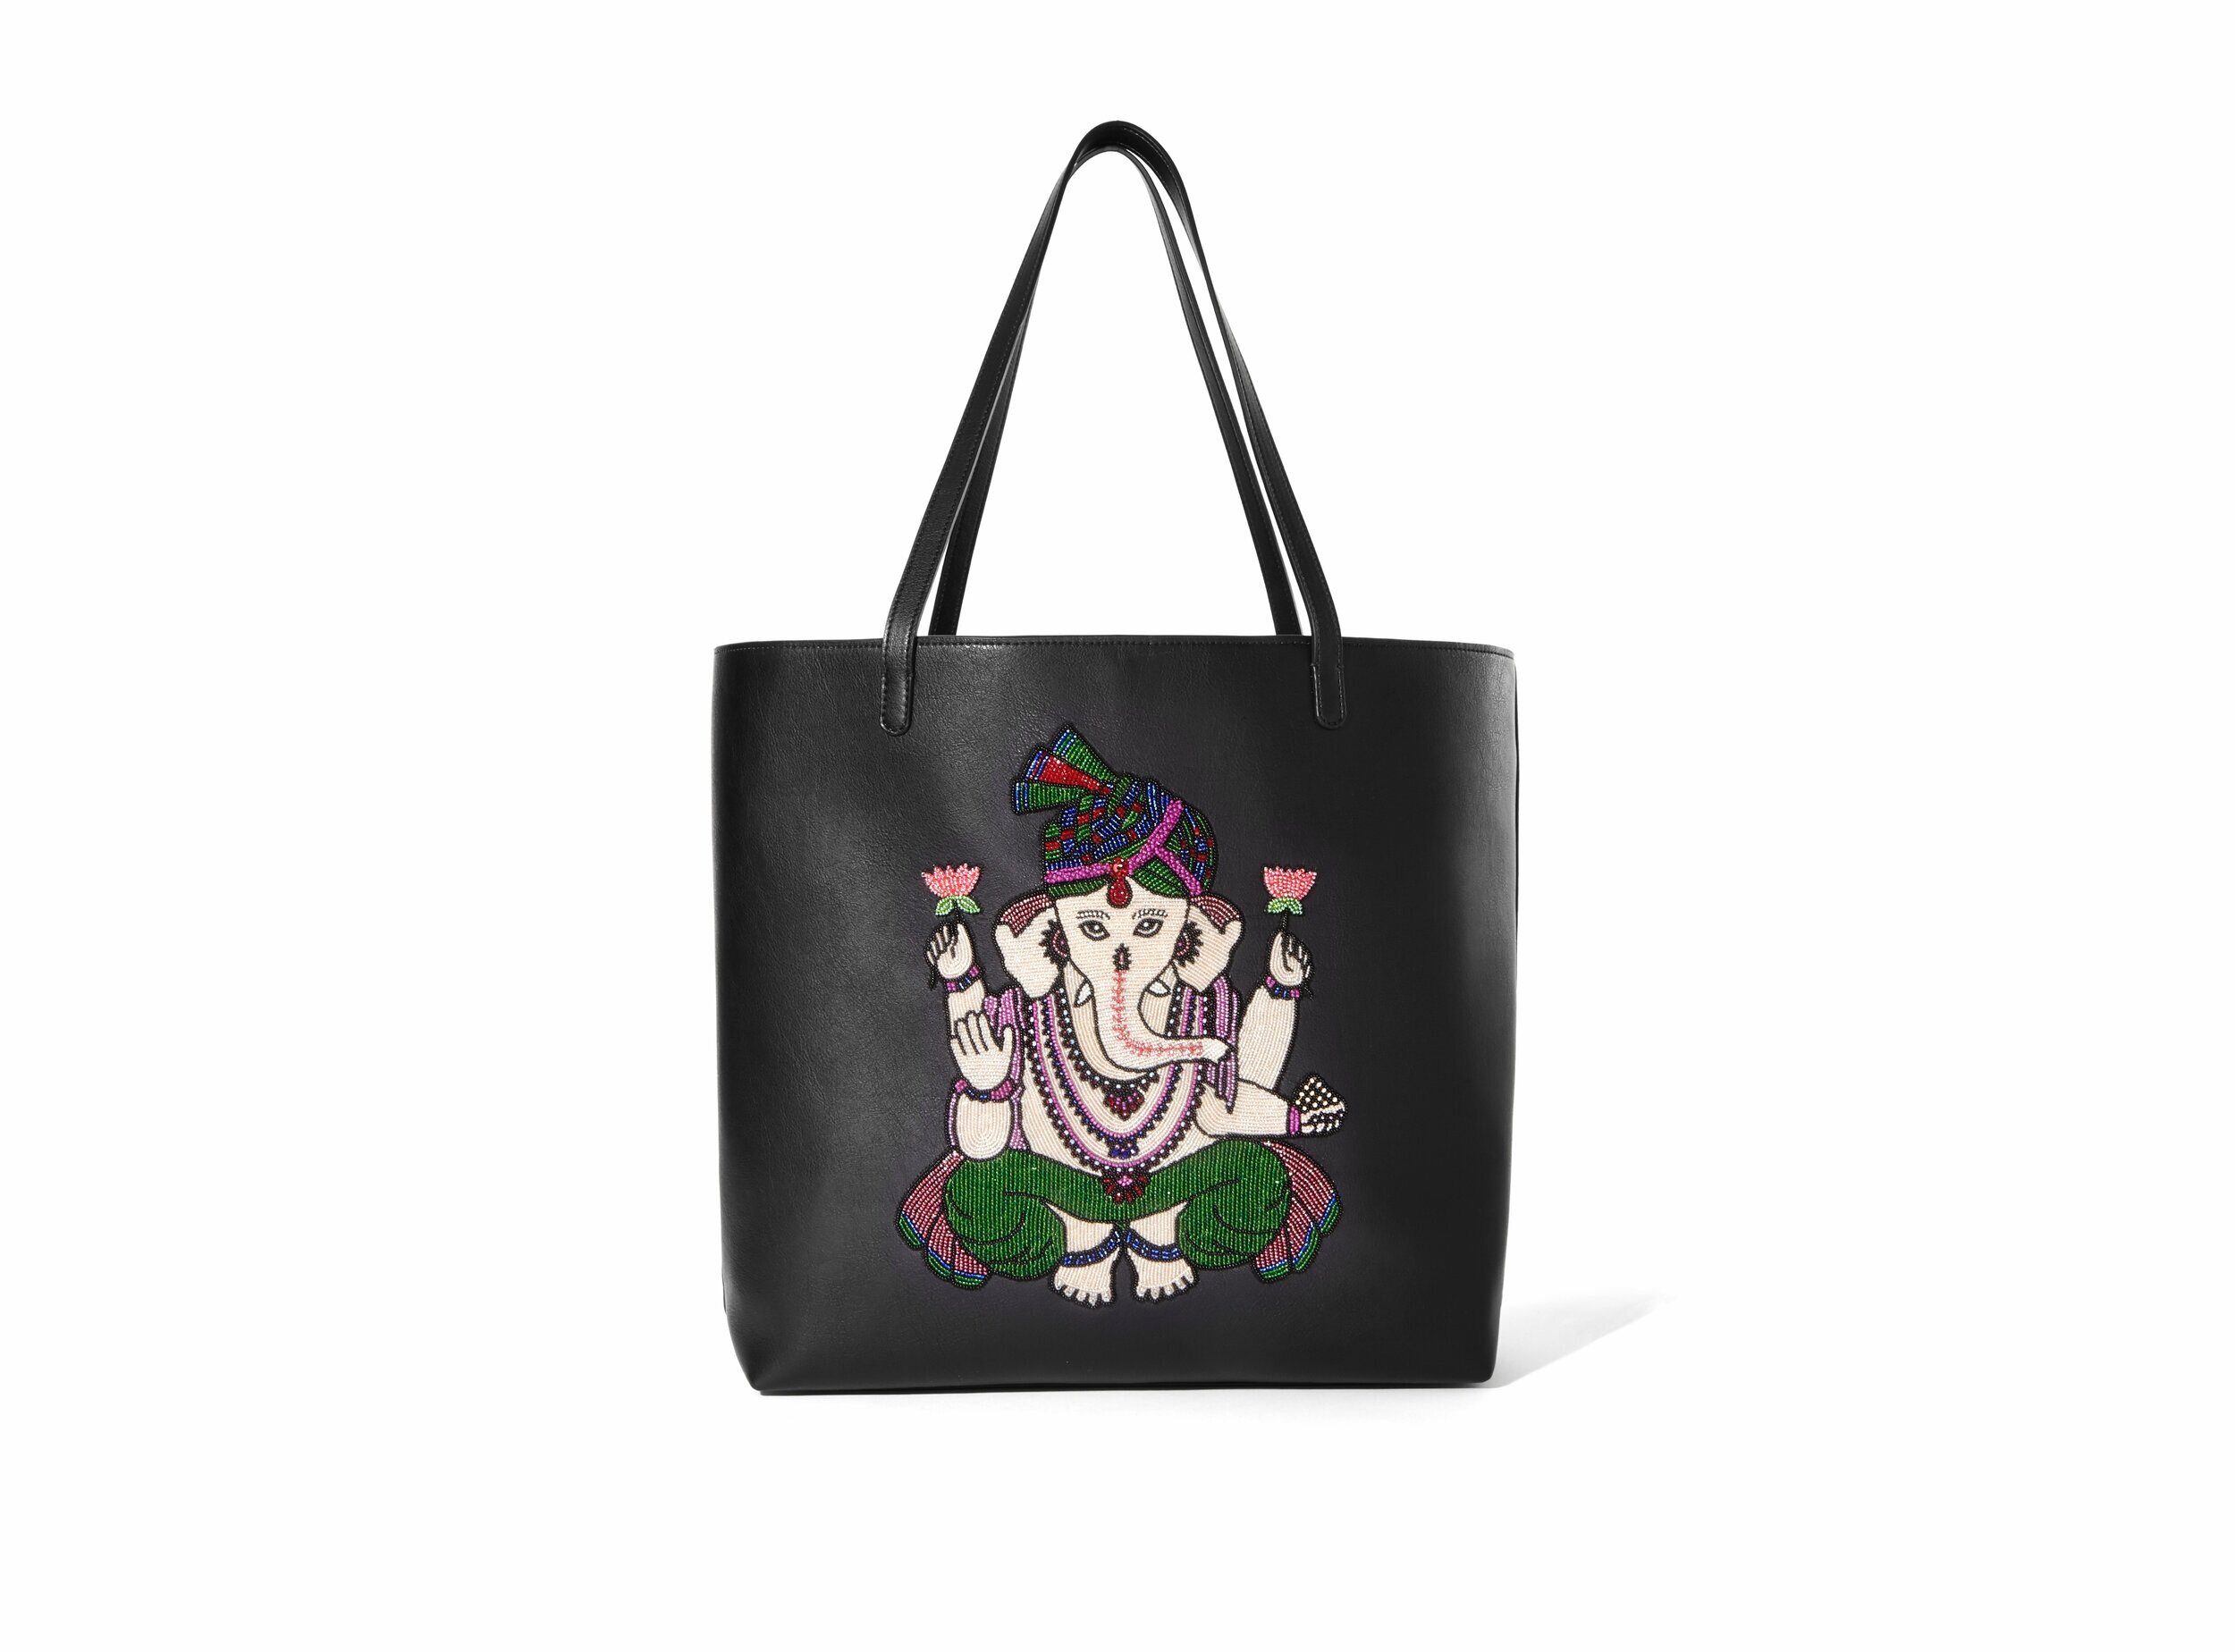 Ganesh Tote Bag by Kristy Patterson Design | Society6